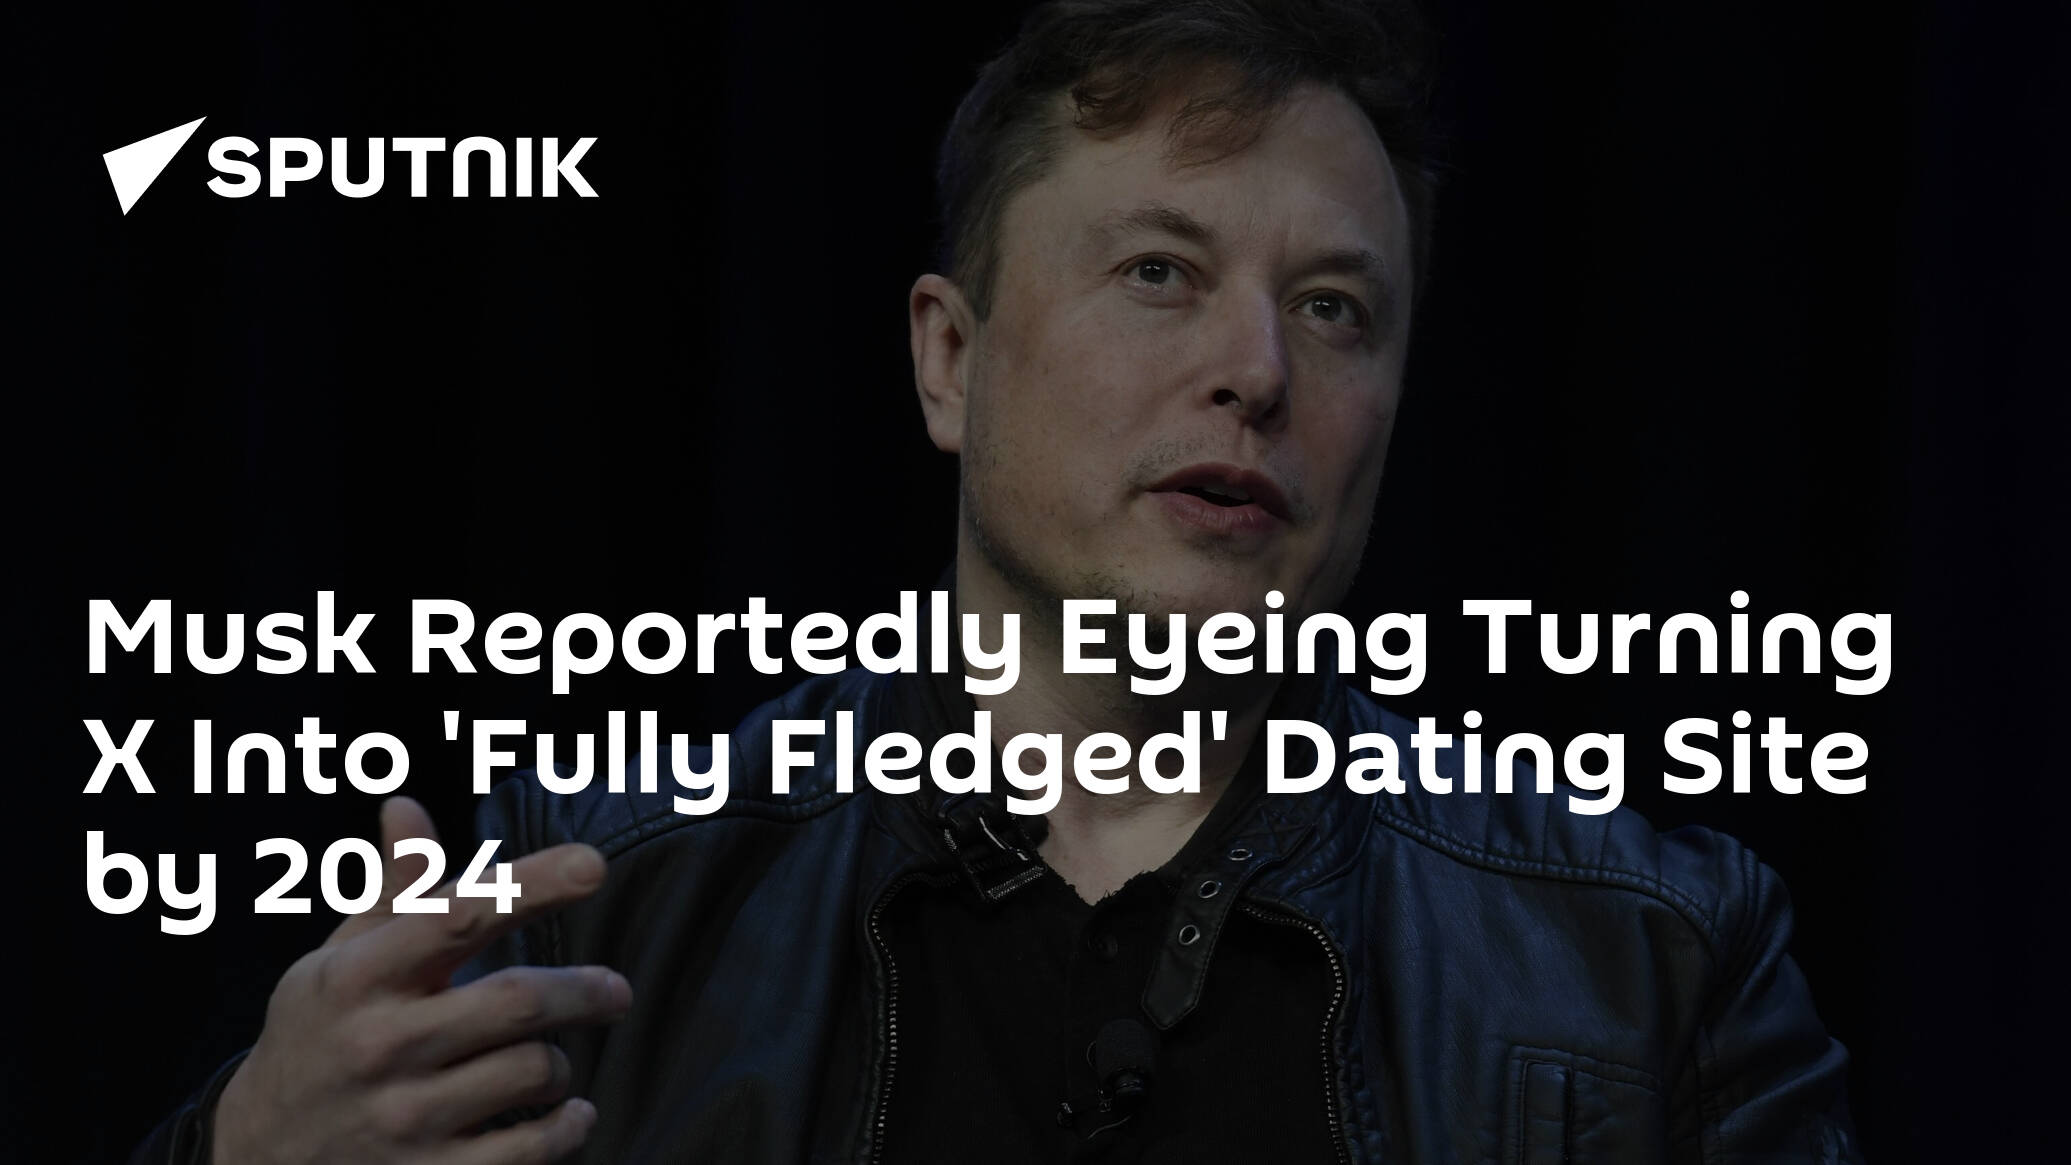 Musk Reportedly Eyeing Turning X Into 'Fully Fledged' Dating Site by 2024